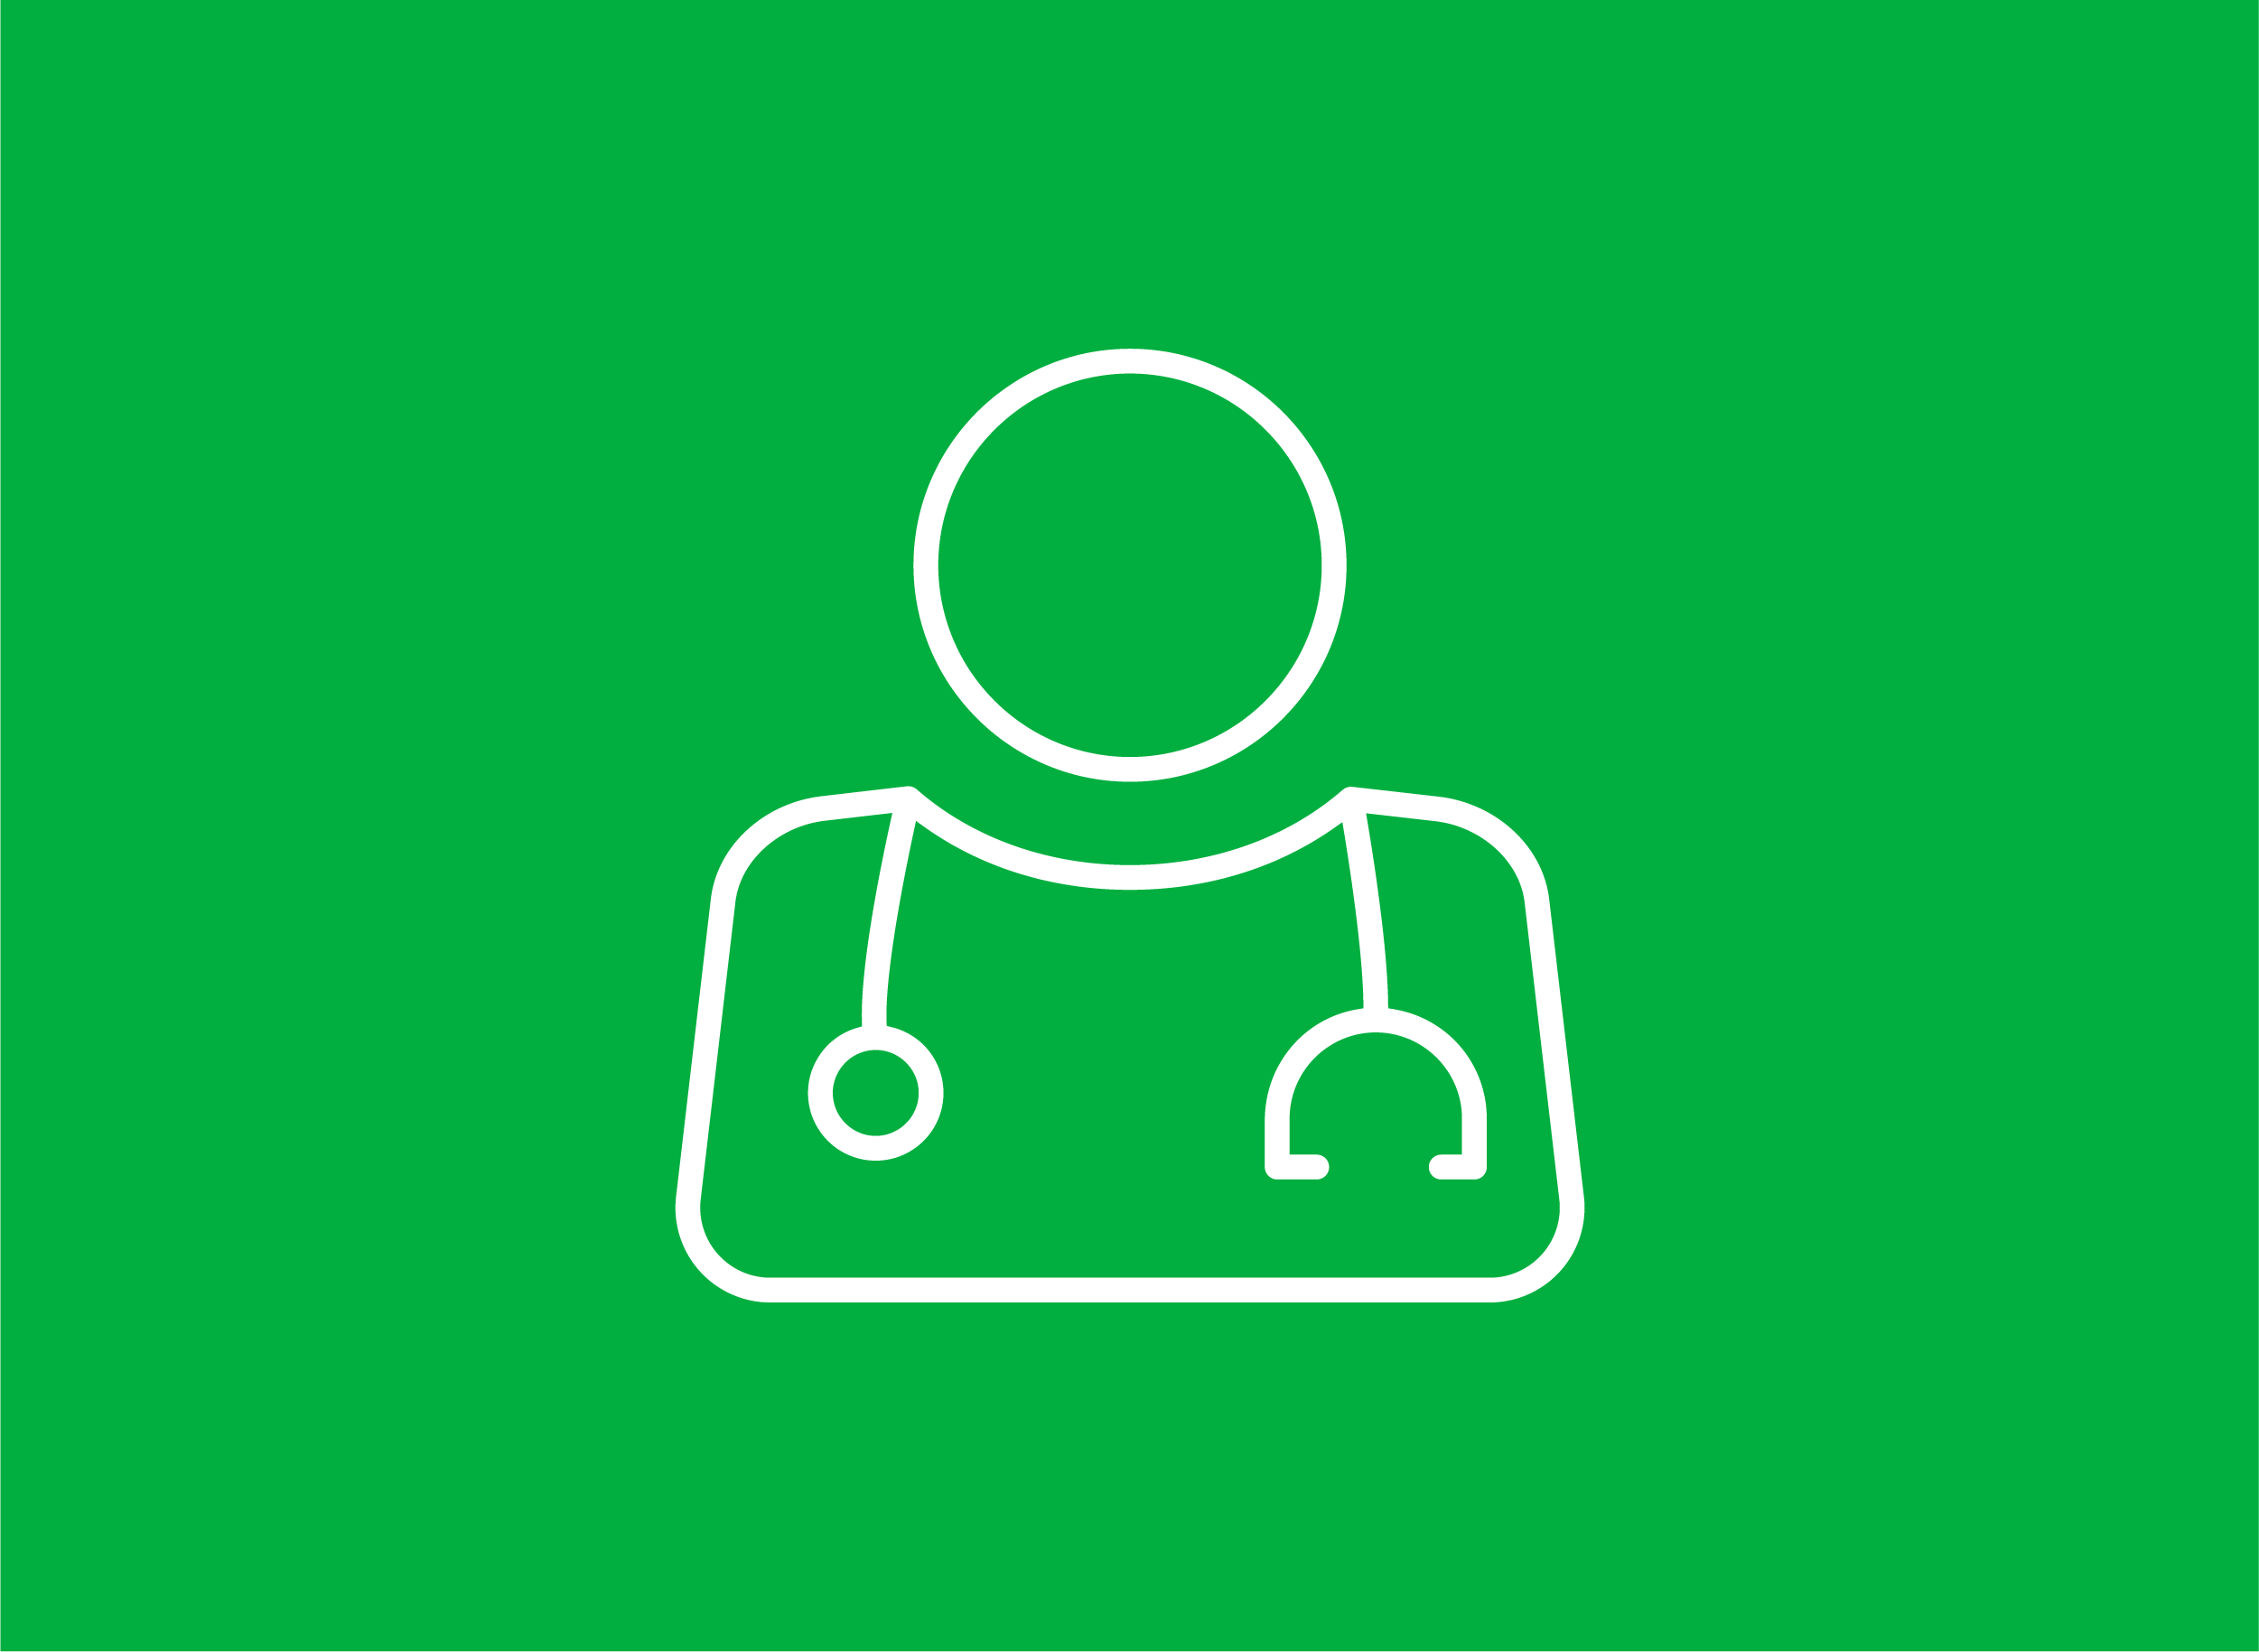 Green icon of a doctor wearing a stethoscope